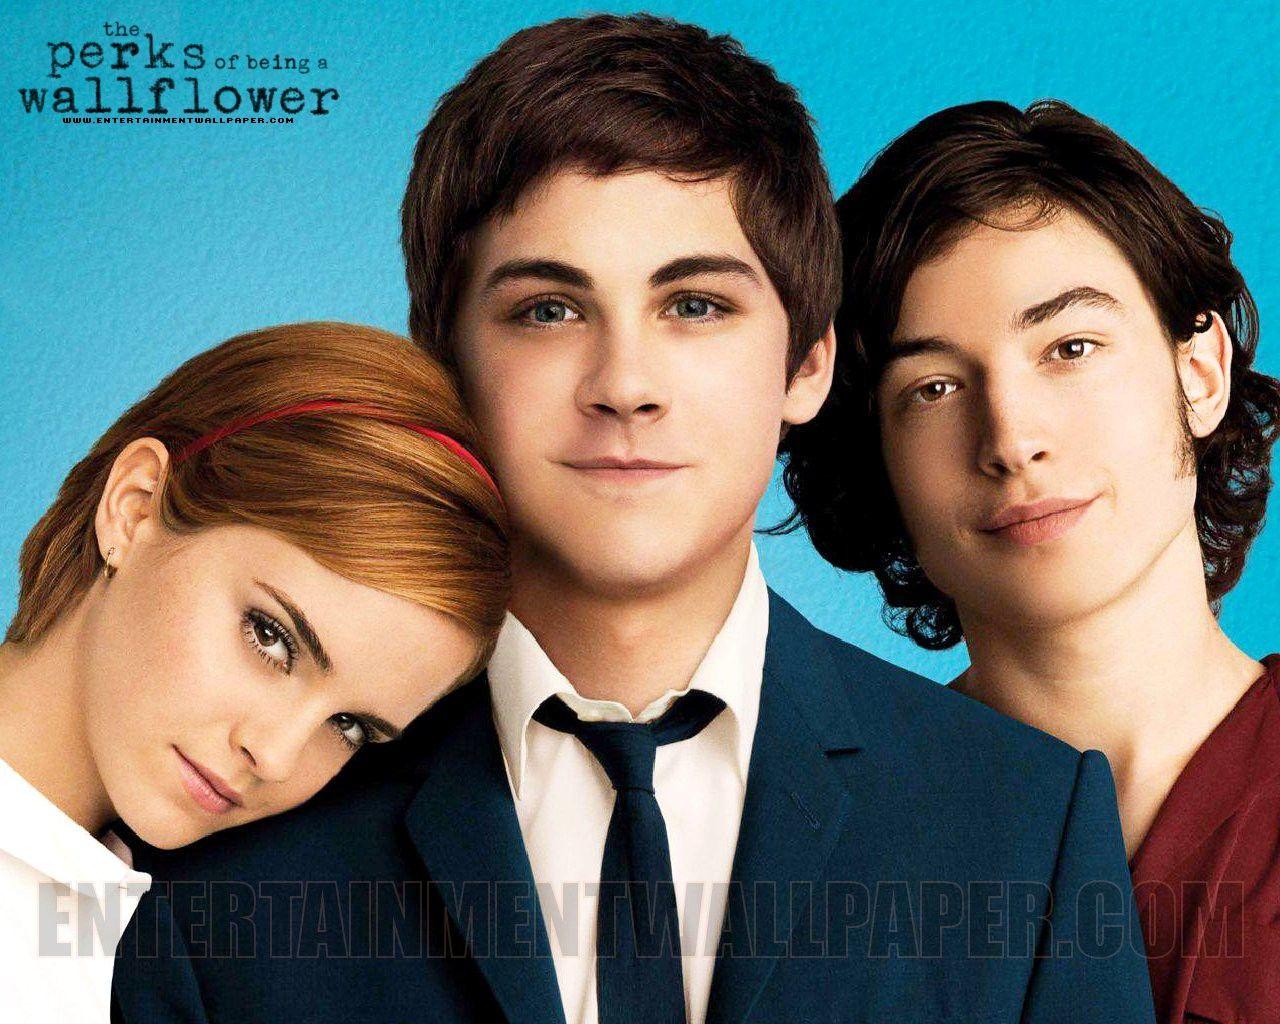 1280x1024 The Perks Of Being A Wallflower hình nền, Movie, HQ The Perks Of